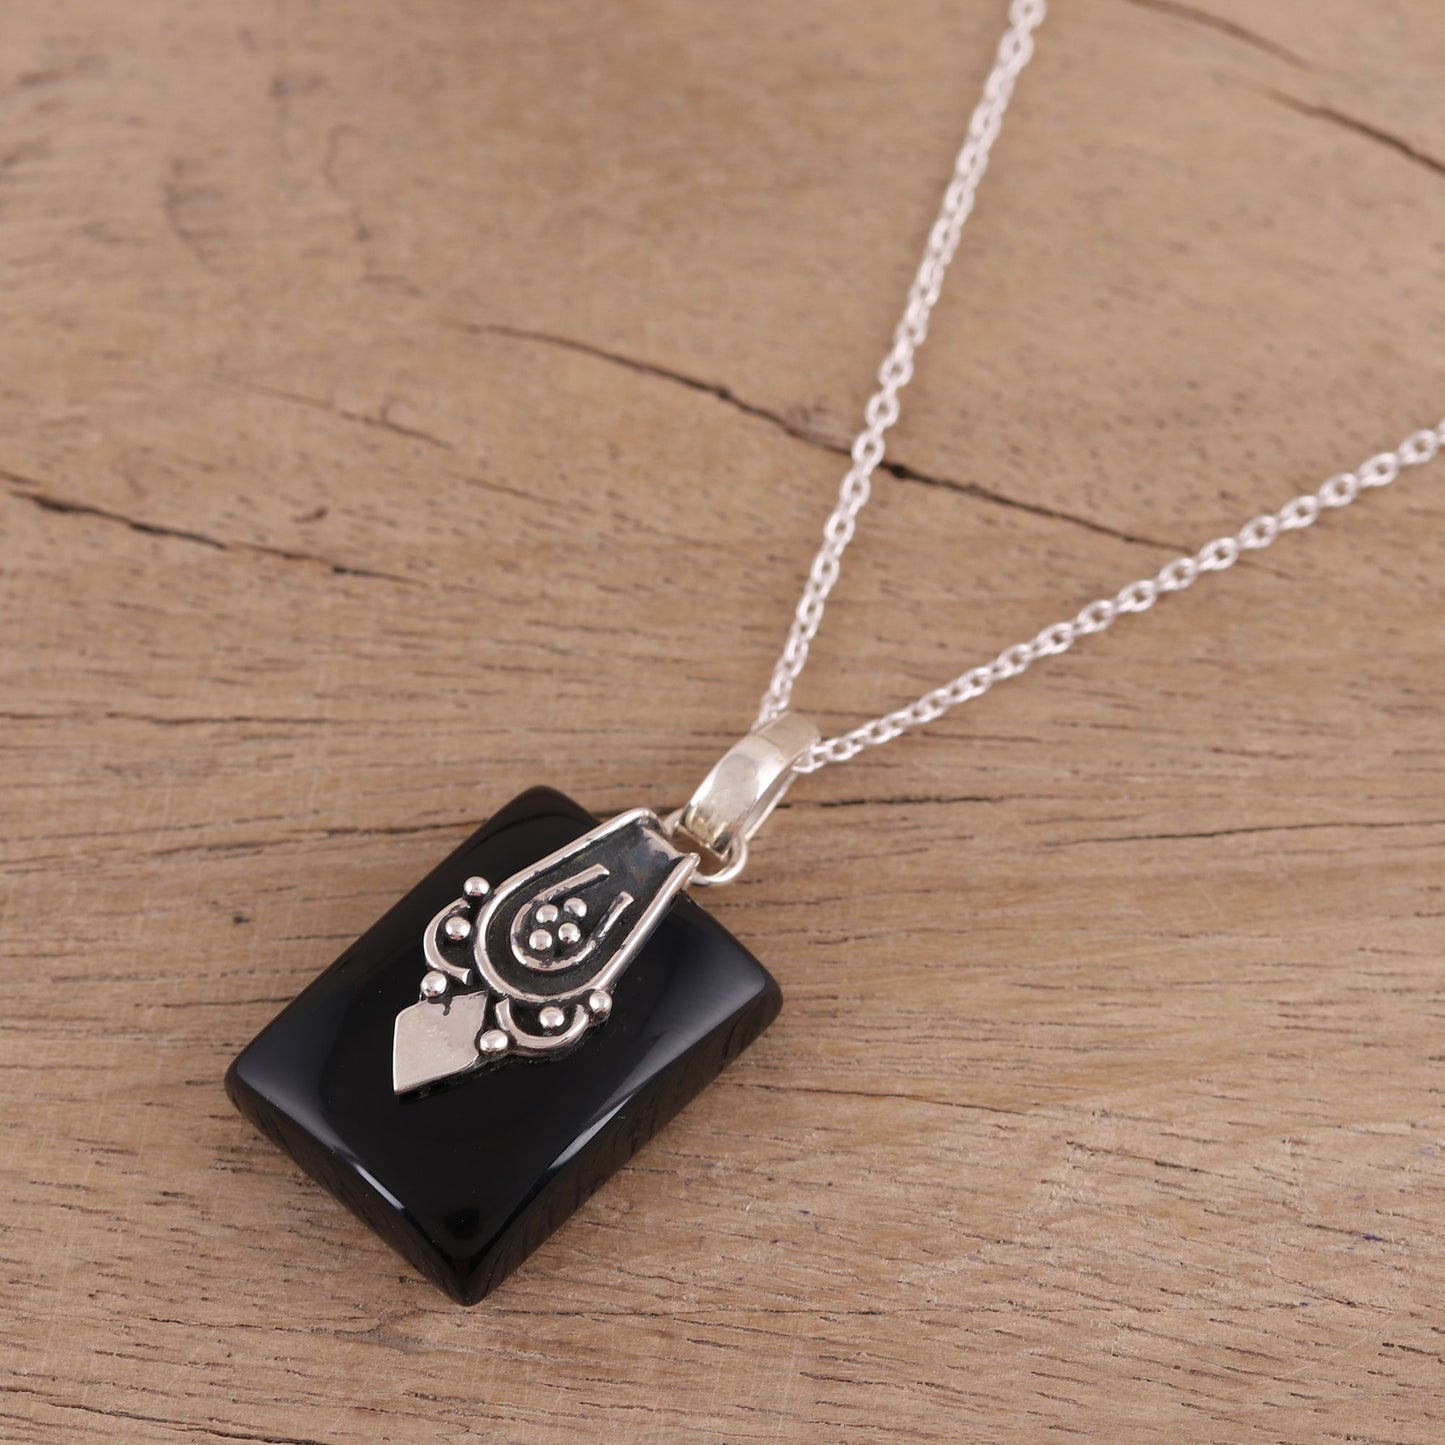 Midnight Greeting Black Onyx and Sterling Silver Pendant Necklace from India